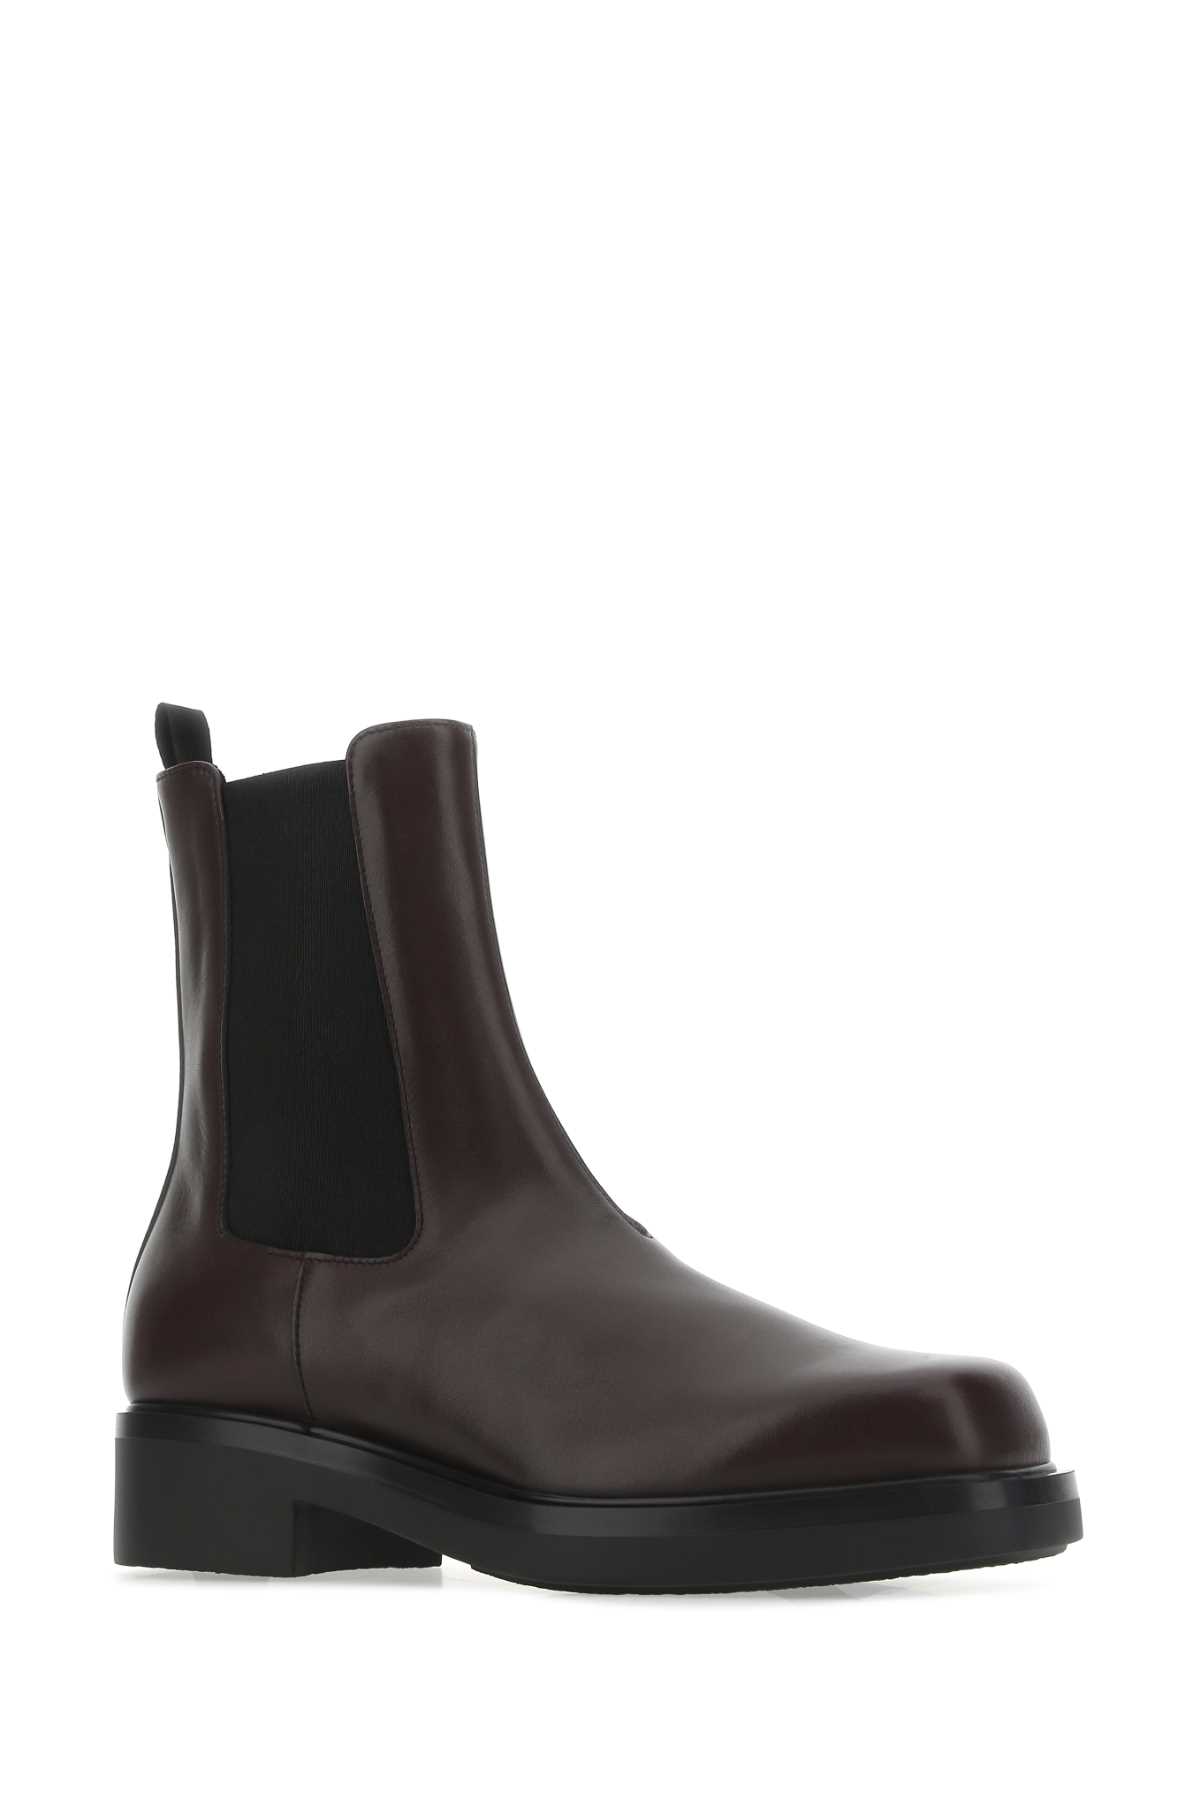 Shop Prada Aubergine Leather Ankle Boots In F0397